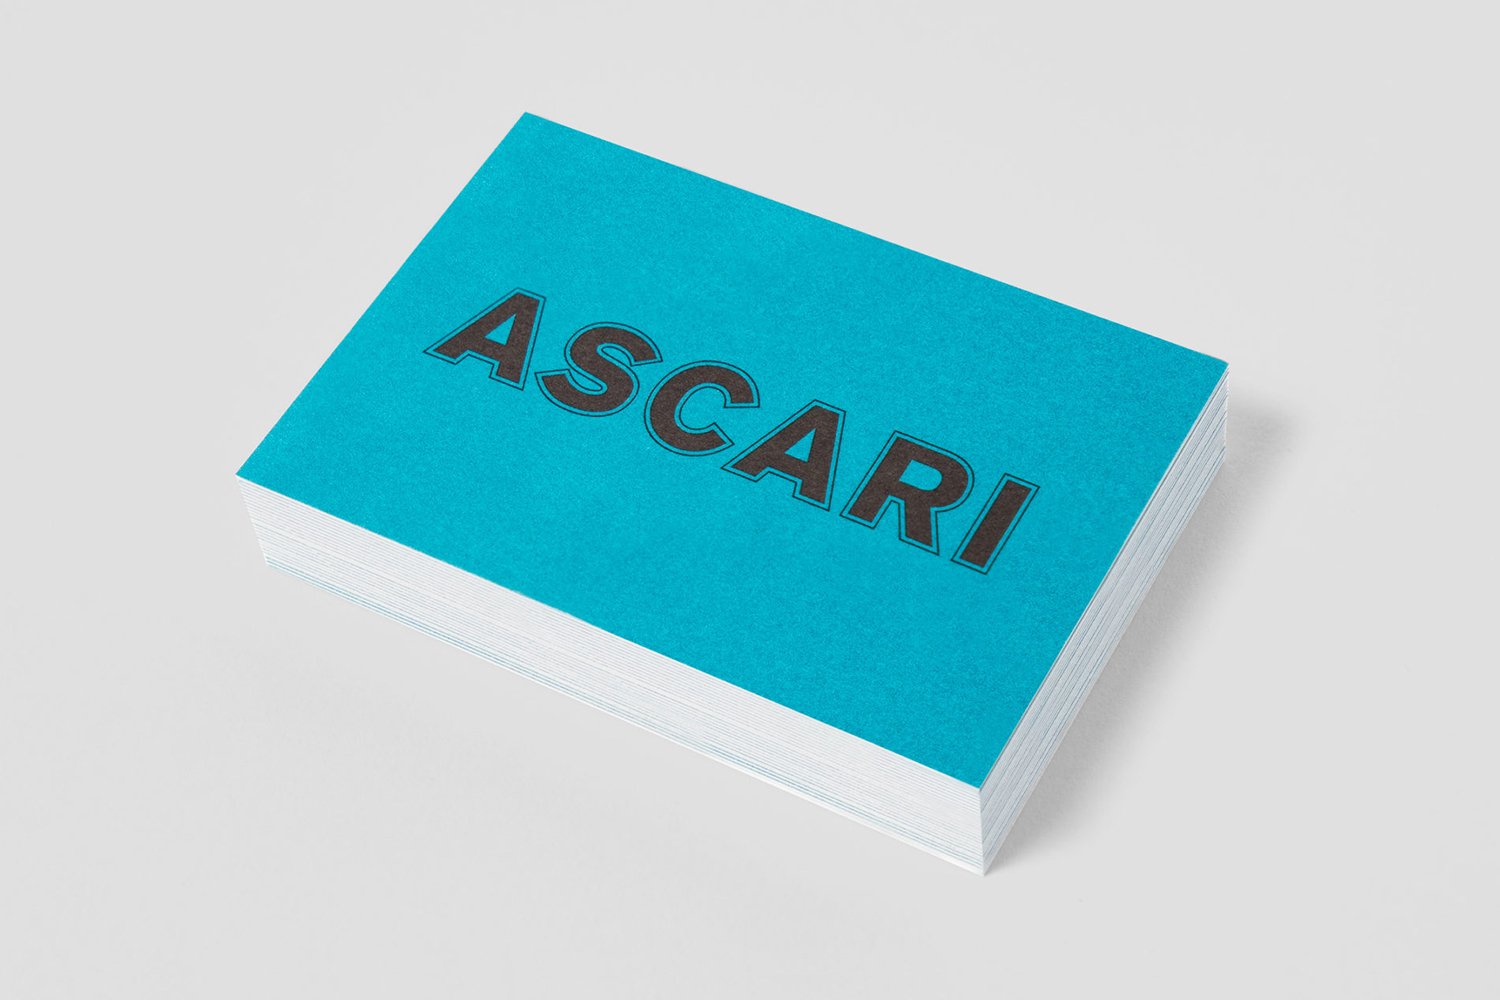 Logotype, menus, signage and package design by Blok for Italian resteruant Ascari